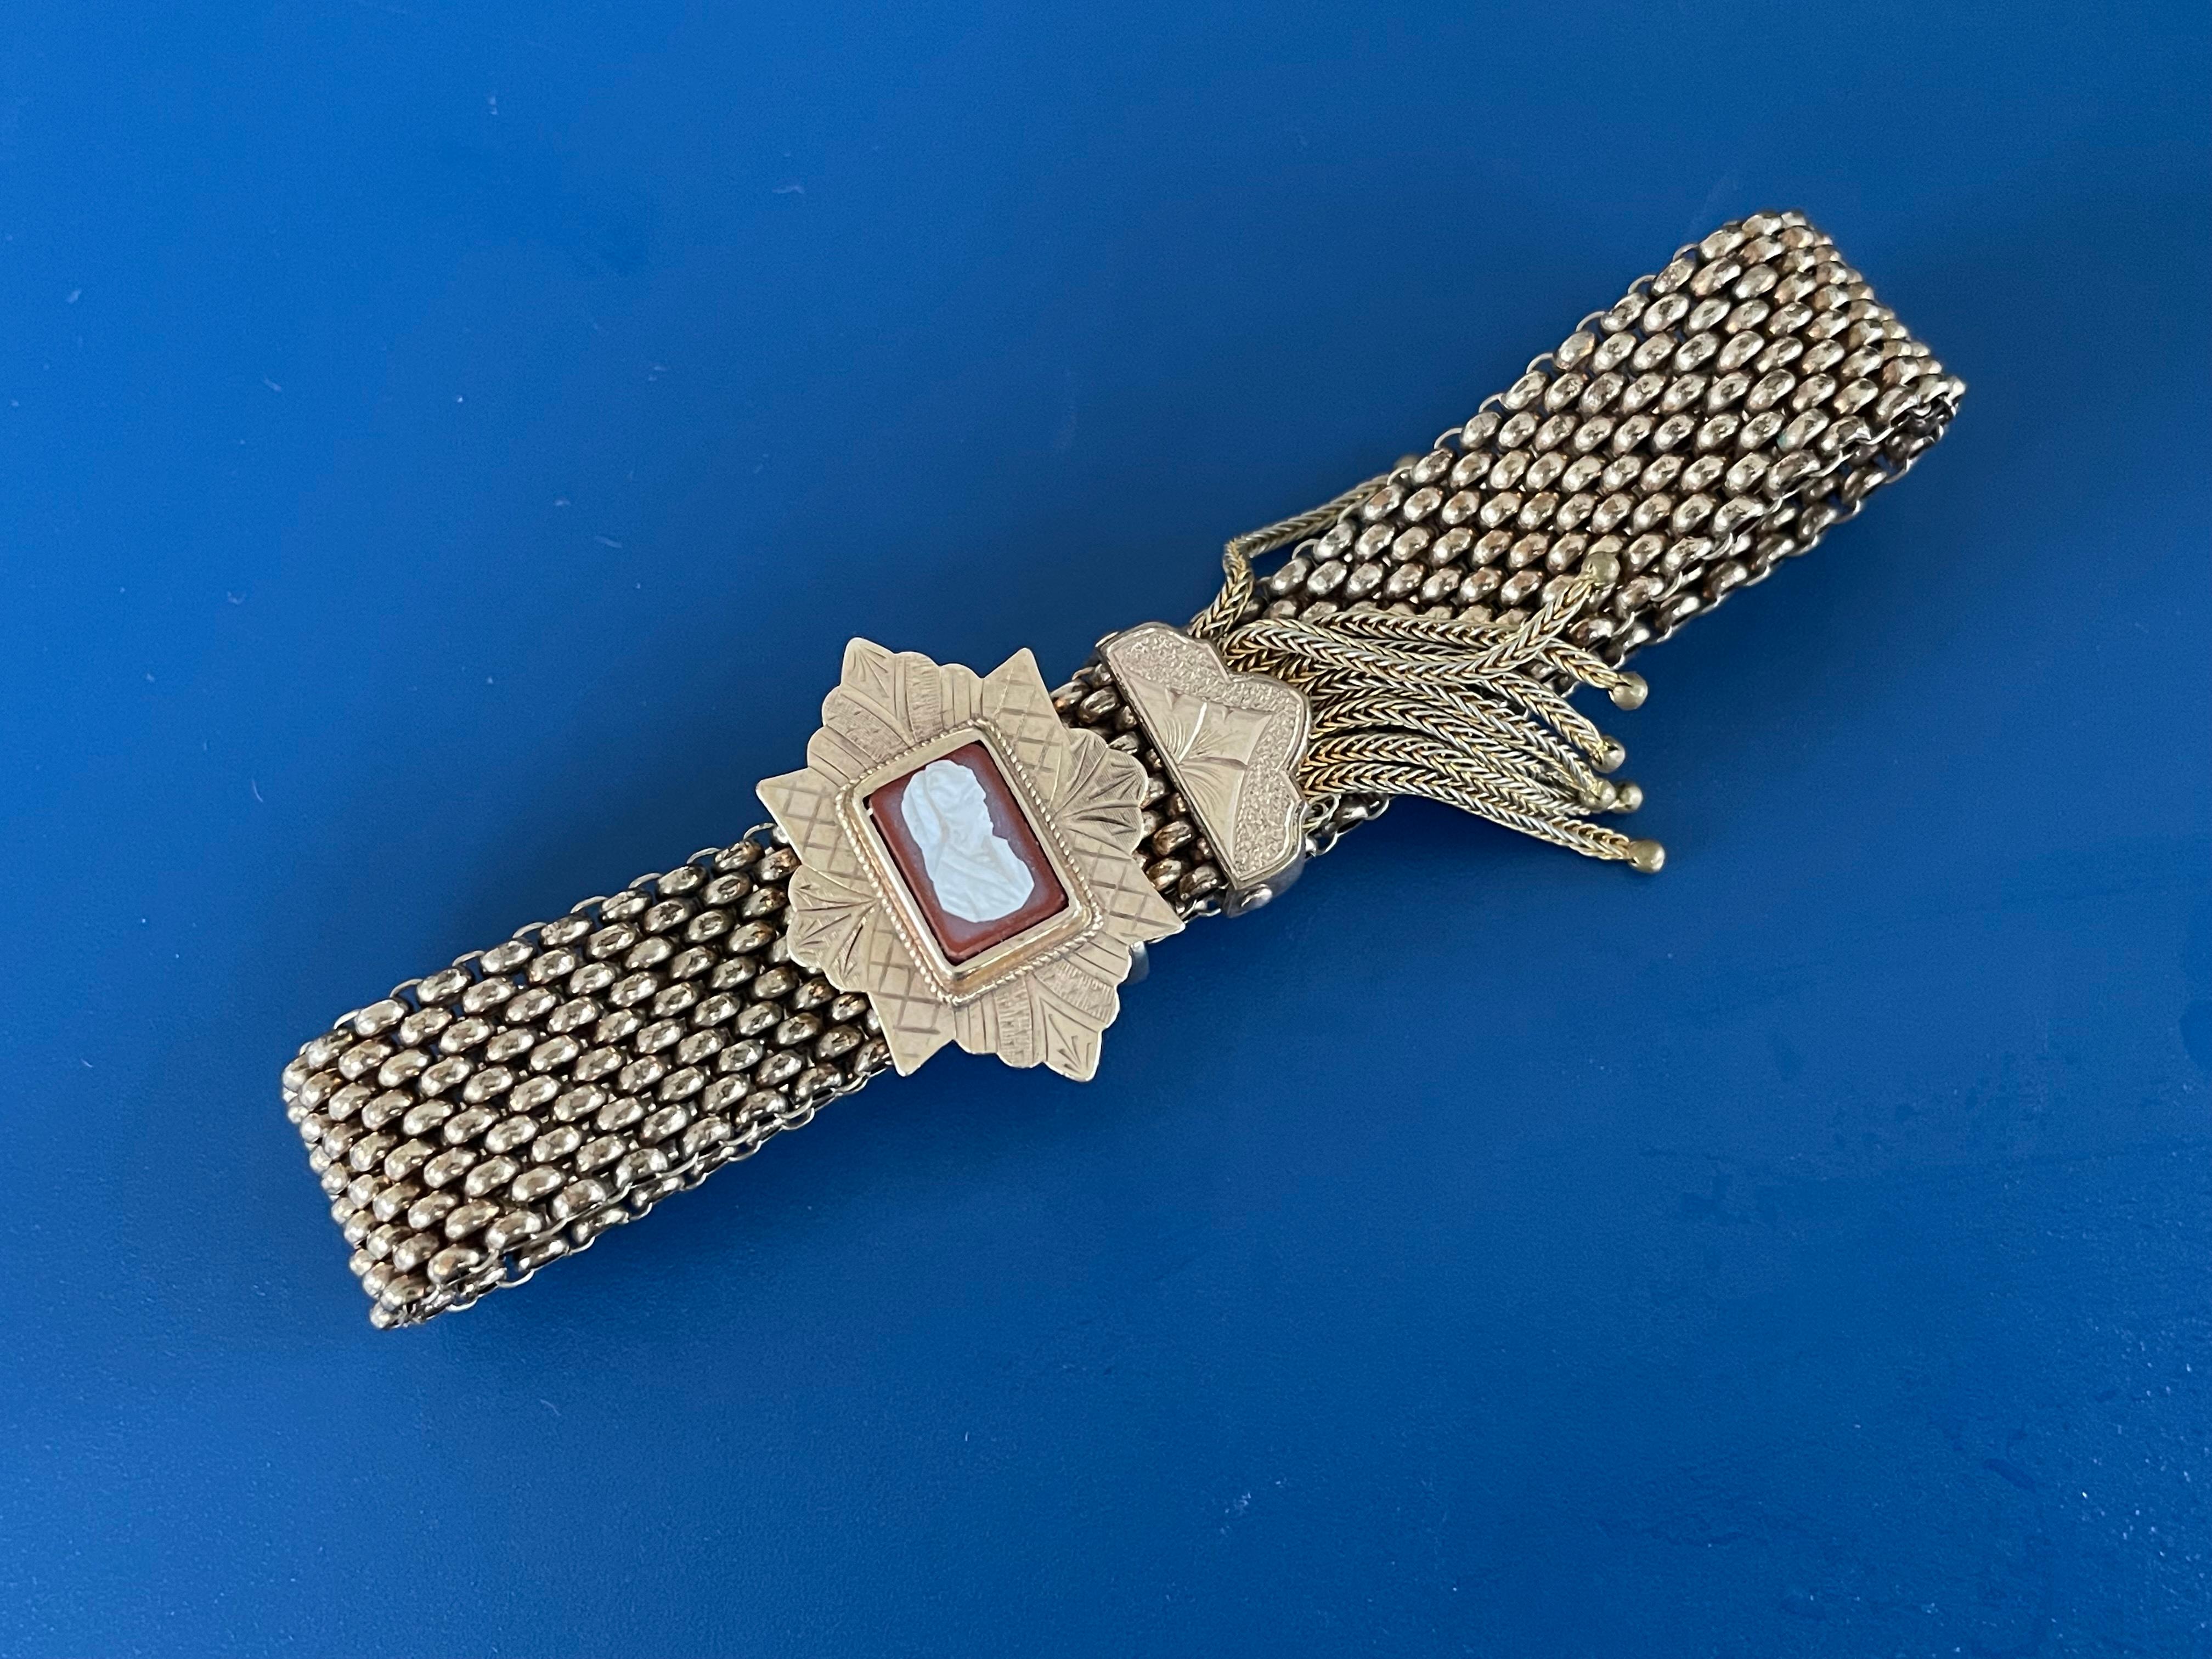 This bracelet incorporates two features which are appreciated by vintage jewelry fans:  the slide; and the tassel.

The cameo slides perfectly on the flexible, mesh bracelet.

Bracelet dimensions: approximately 1/2